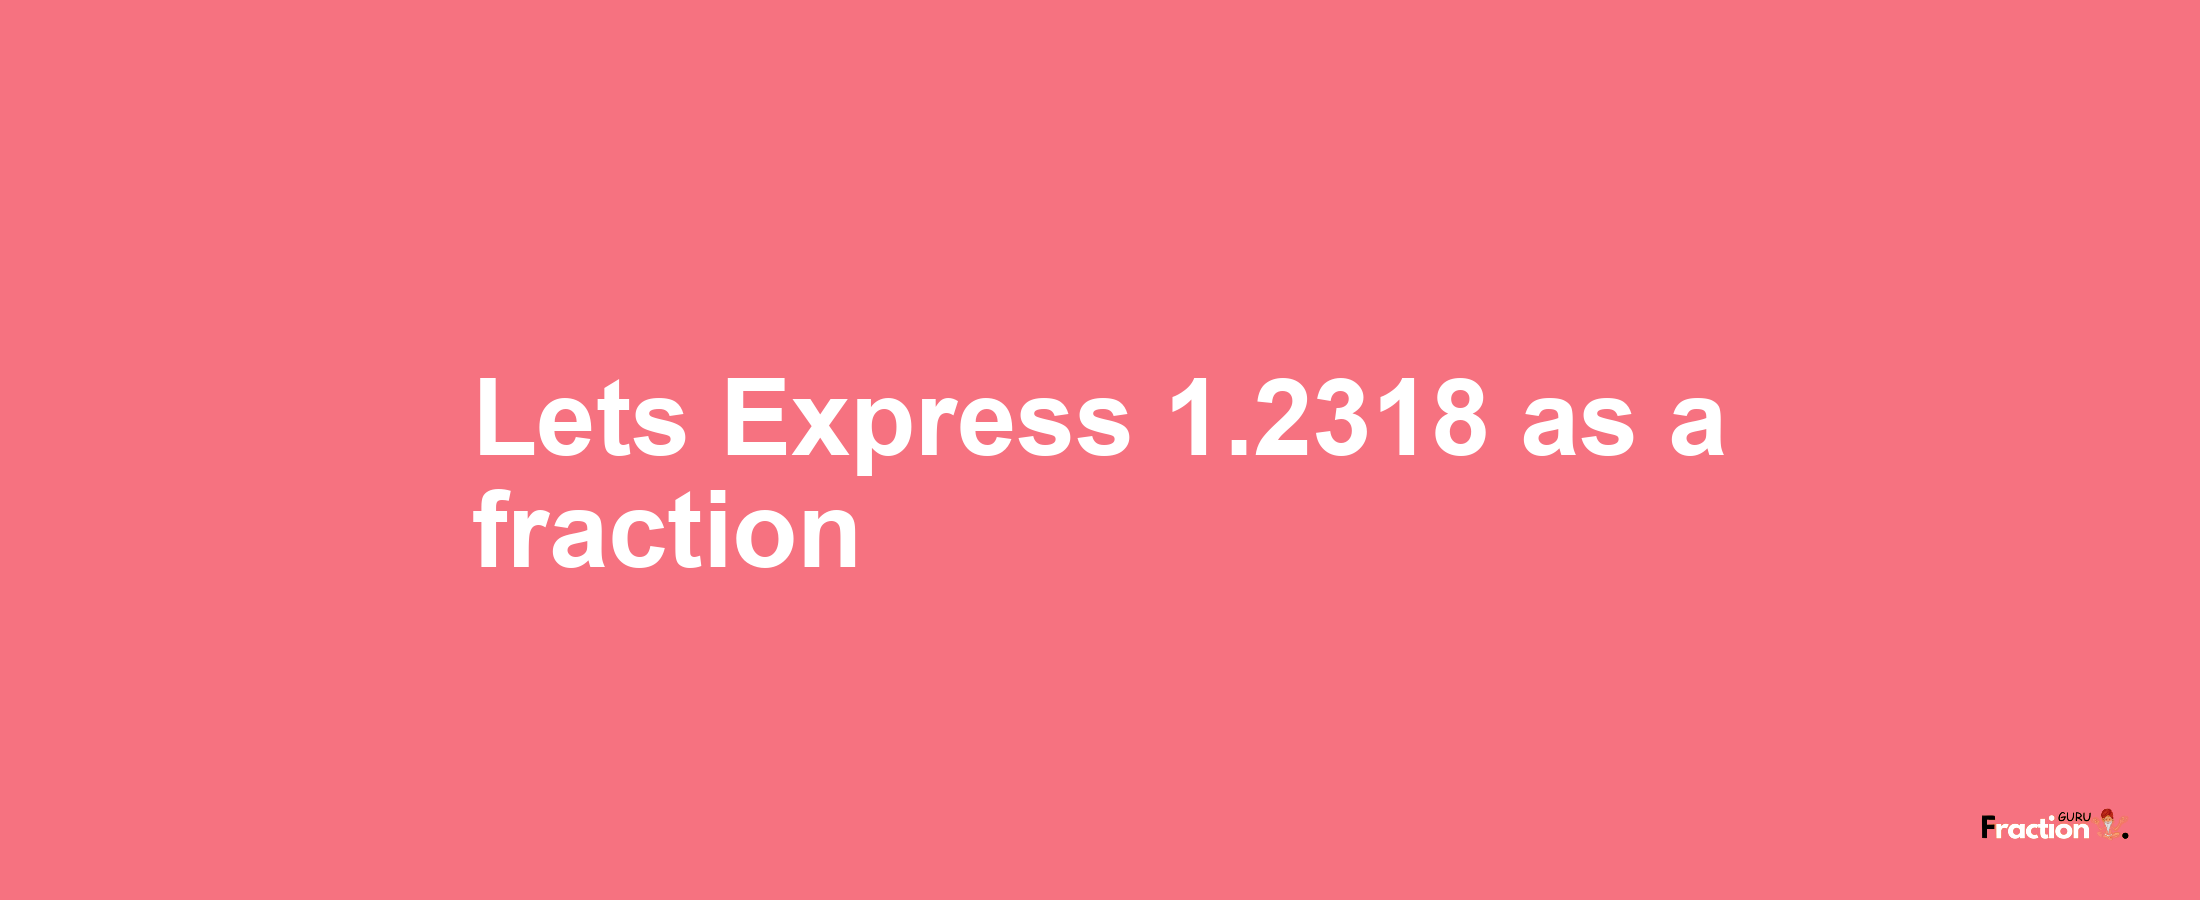 Lets Express 1.2318 as afraction